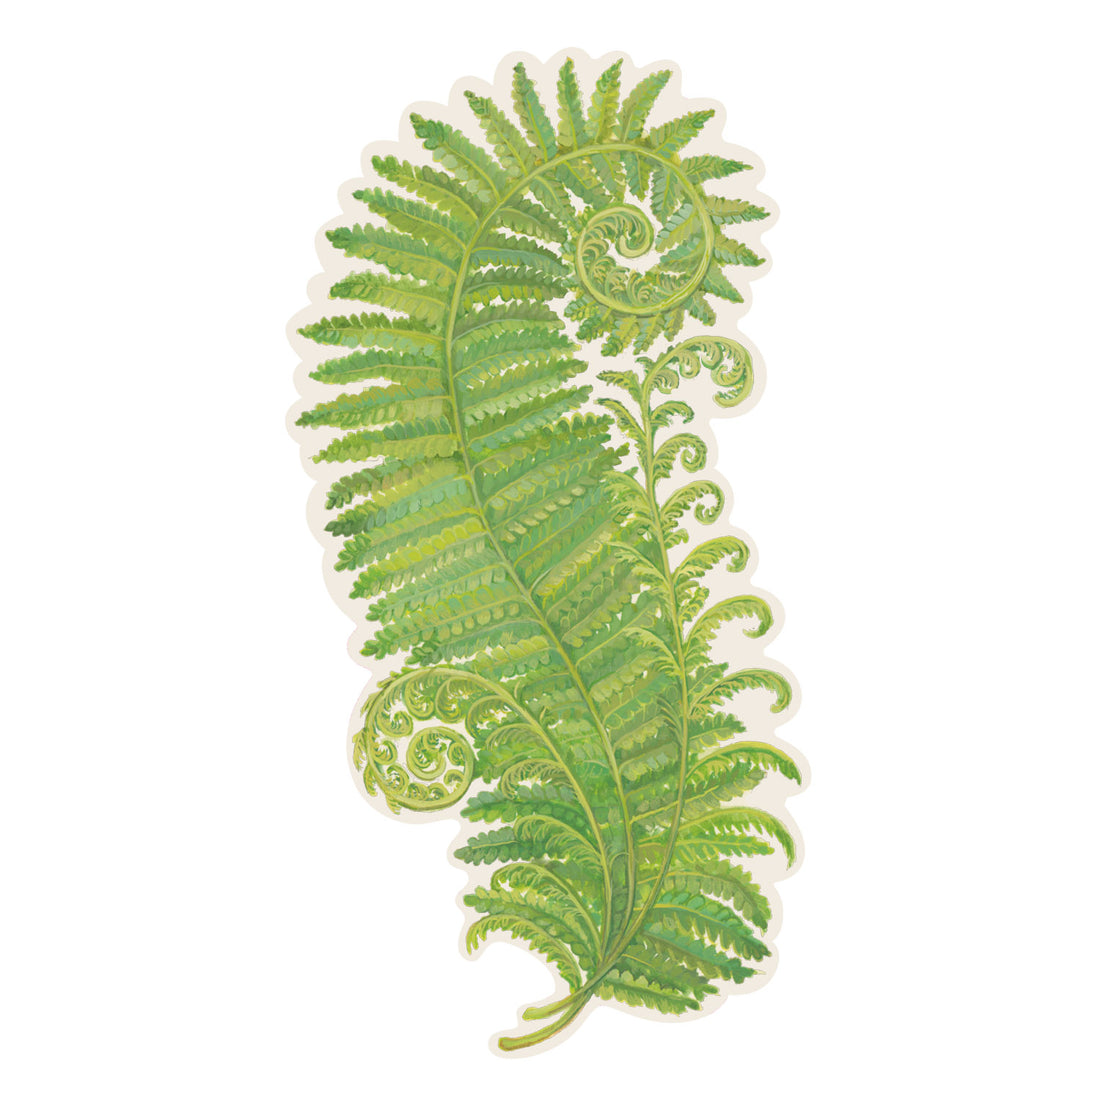 A die-cut illustration of a vibrant green fern frond with delicate coiling leaves.